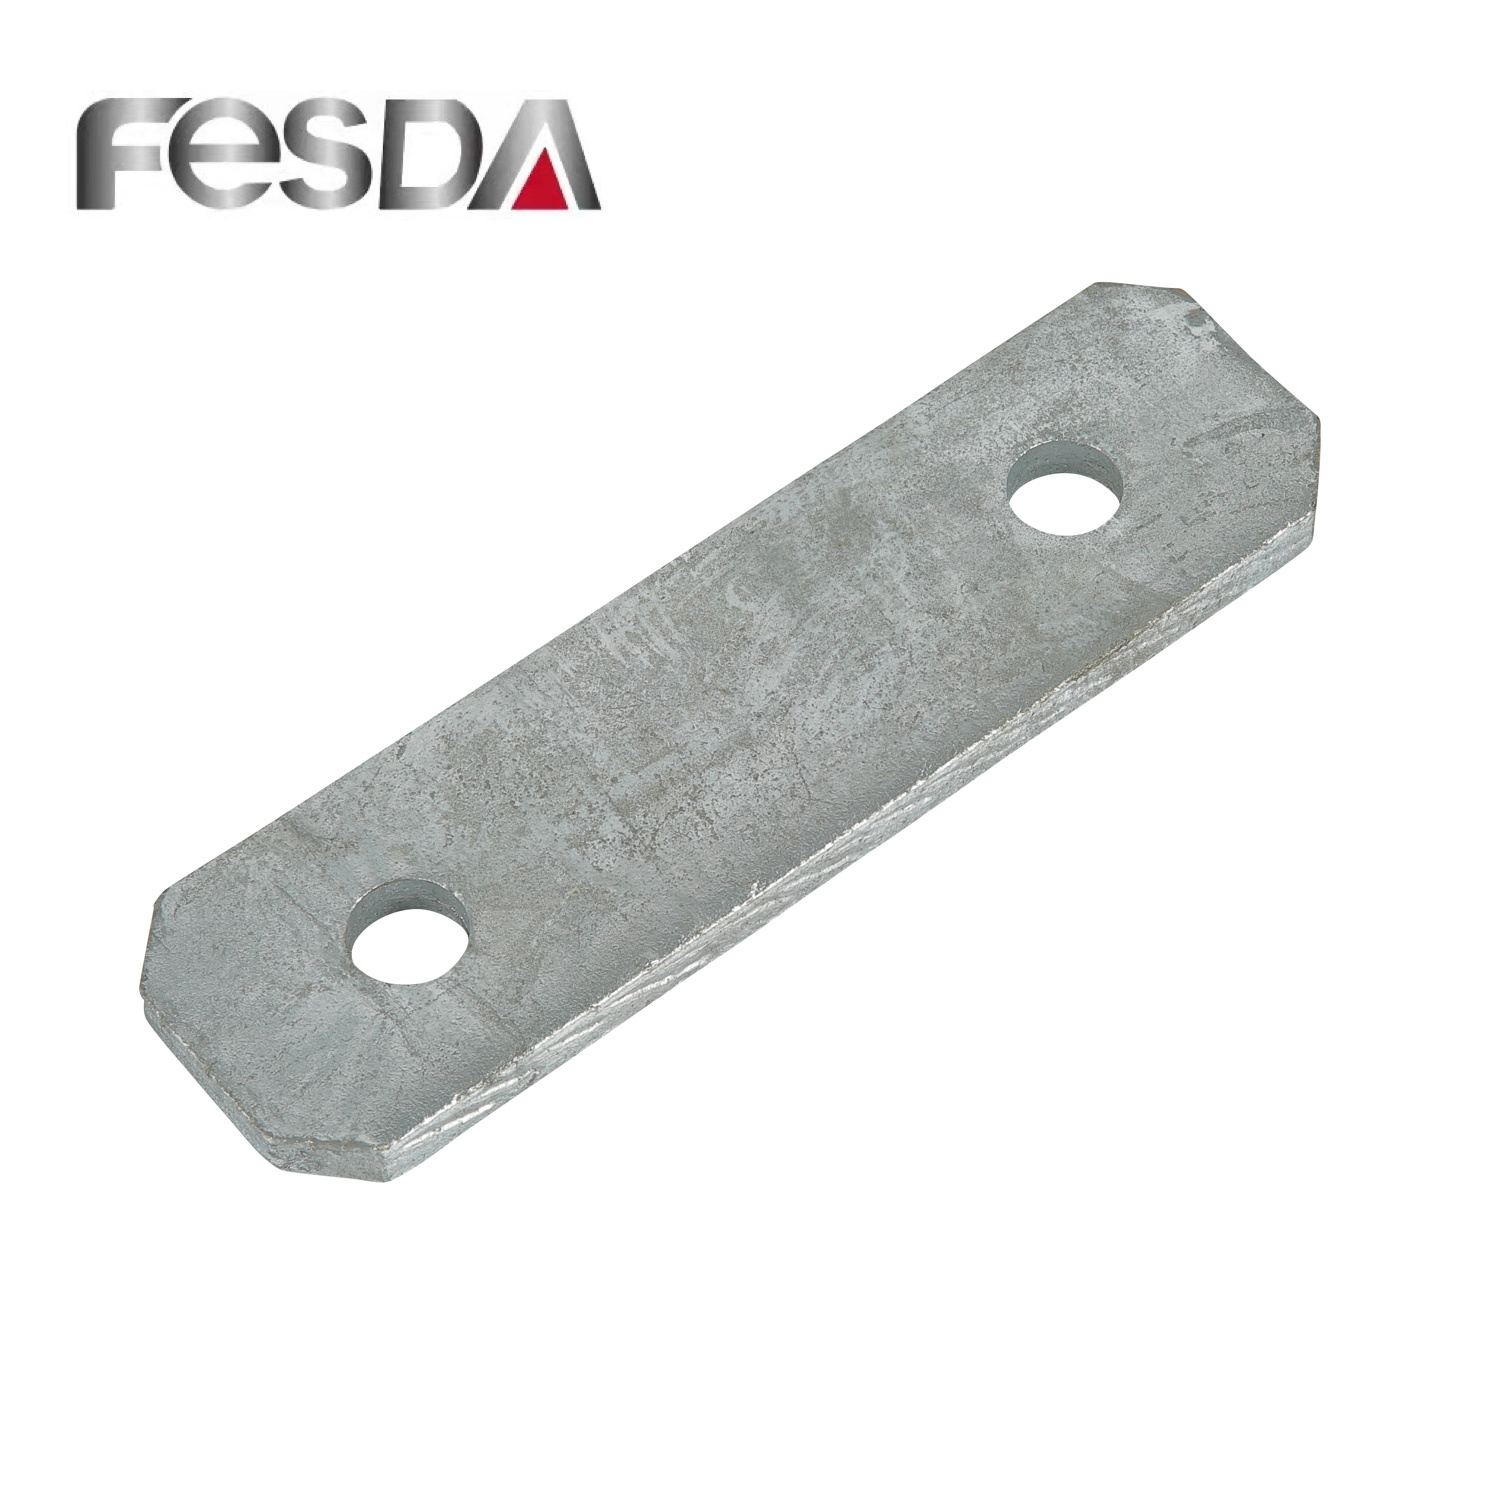 Hot Wholesaler Price for Aluminum Connection Gasket